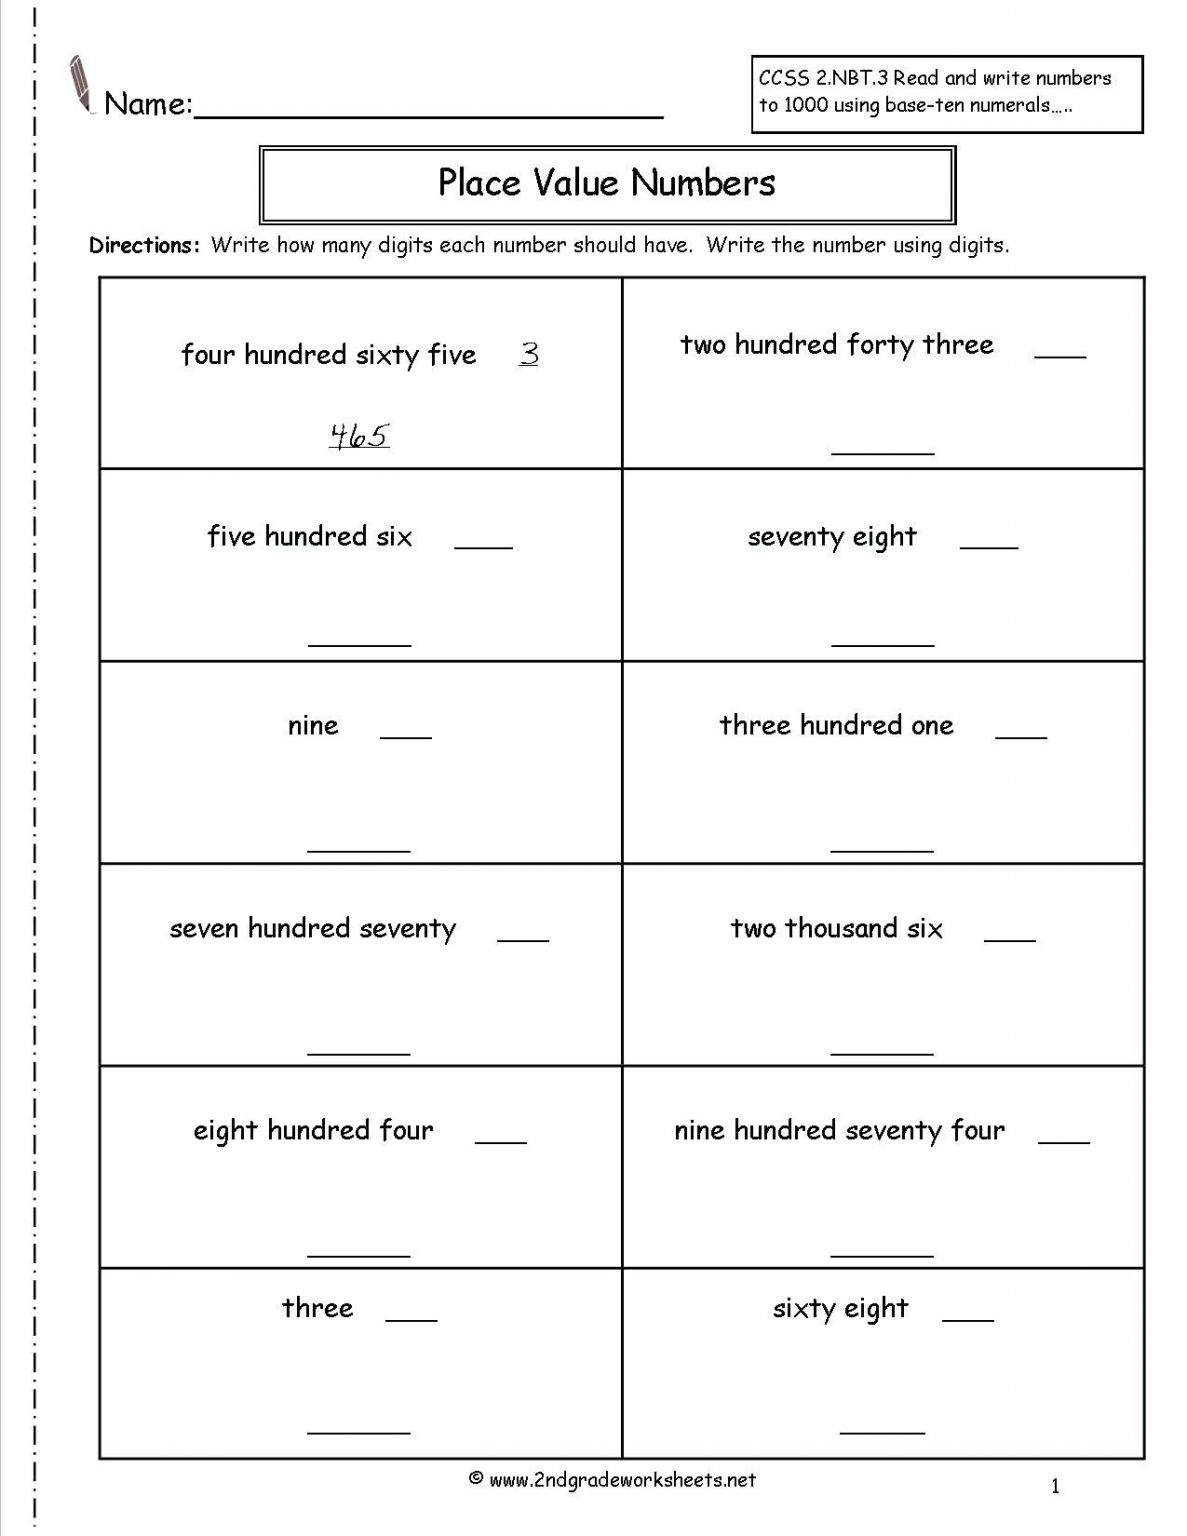 5-free-math-worksheets-third-grade-3-place-value-and-rounding-round-4-digit-numbers-nearest-100